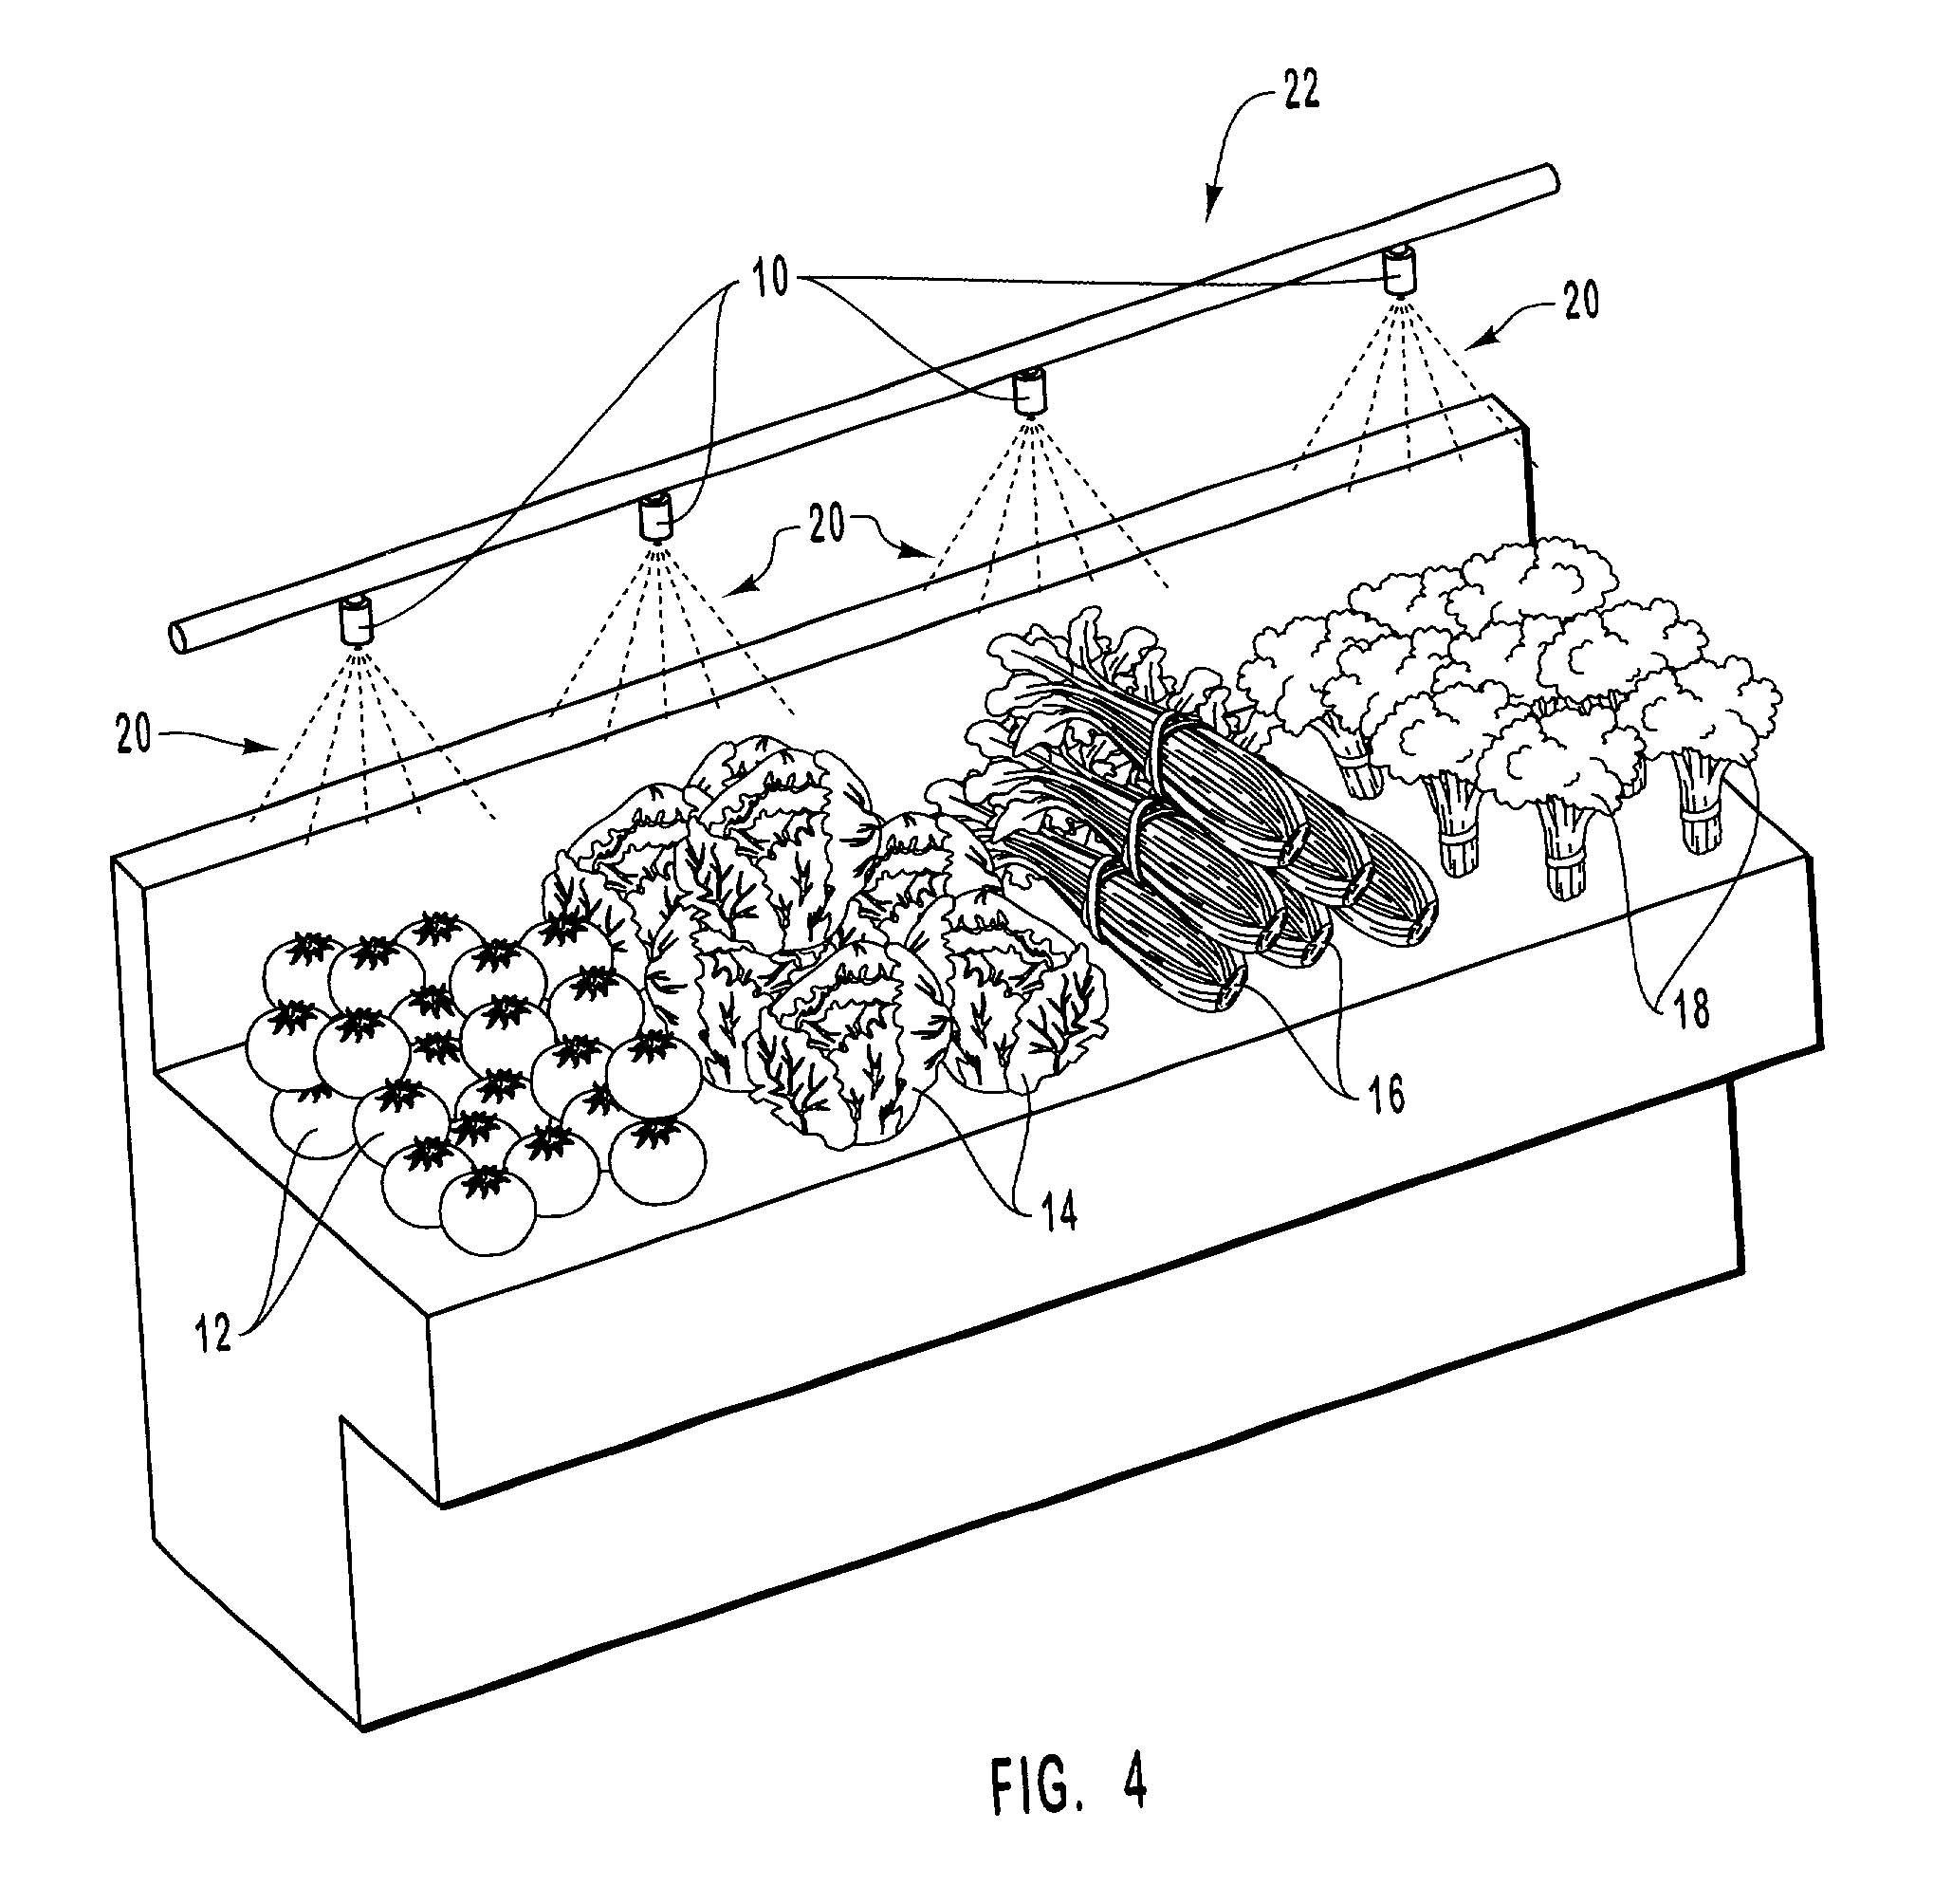 Treatment of perishable products using aqueous chemical composition